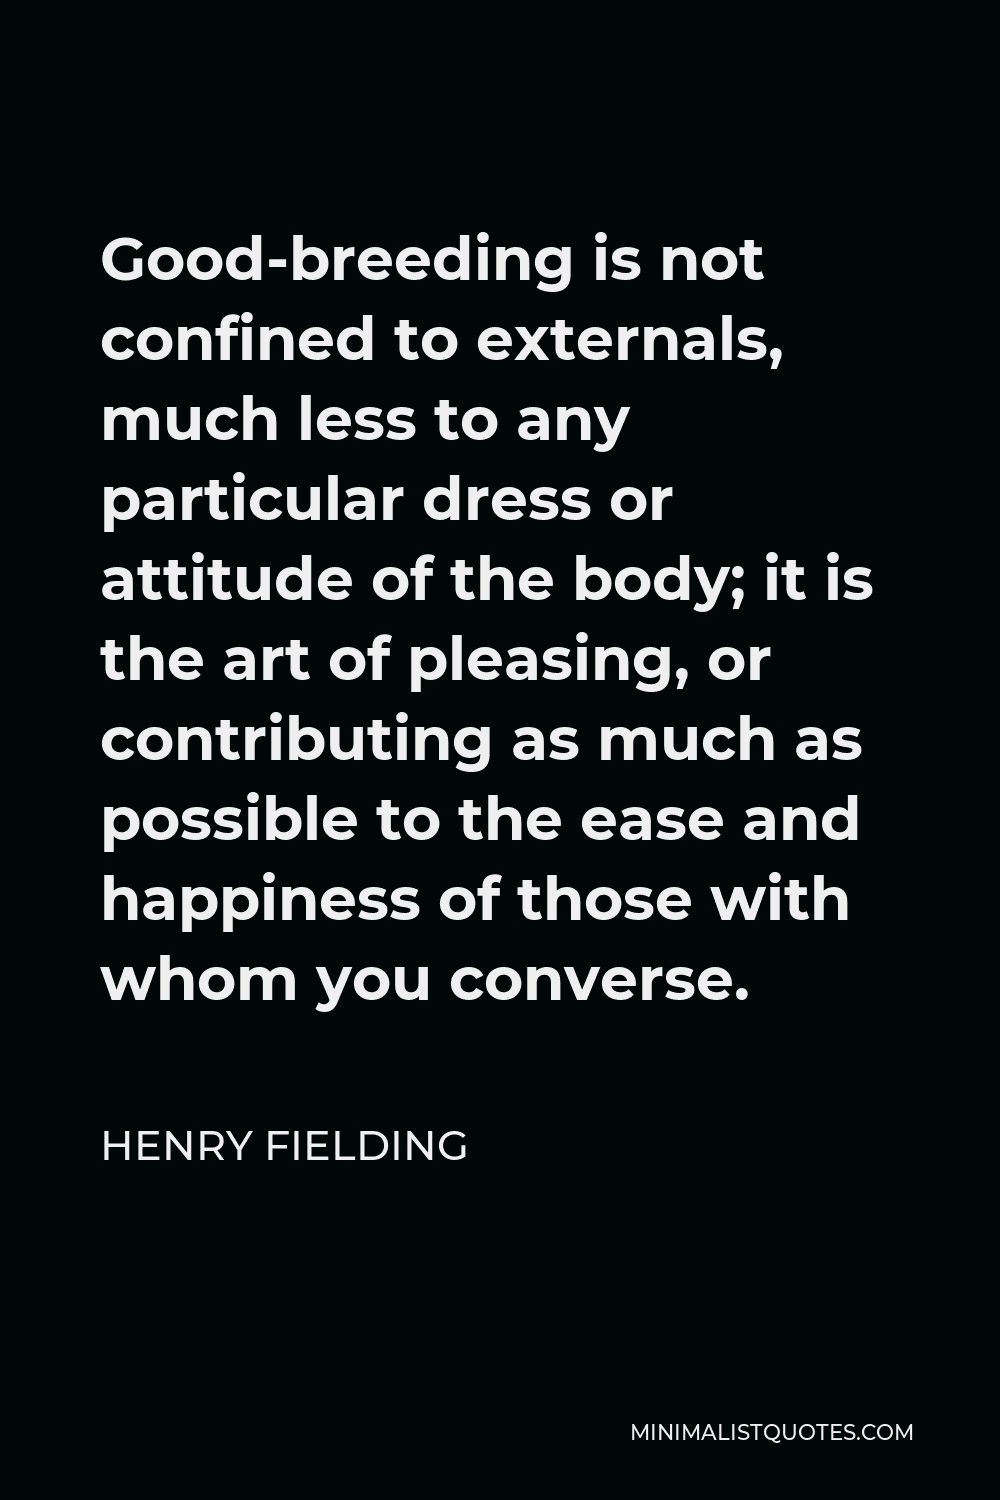 Henry Fielding Quote - Good-breeding is not confined to externals, much less to any particular dress or attitude of the body; it is the art of pleasing, or contributing as much as possible to the ease and happiness of those with whom you converse.